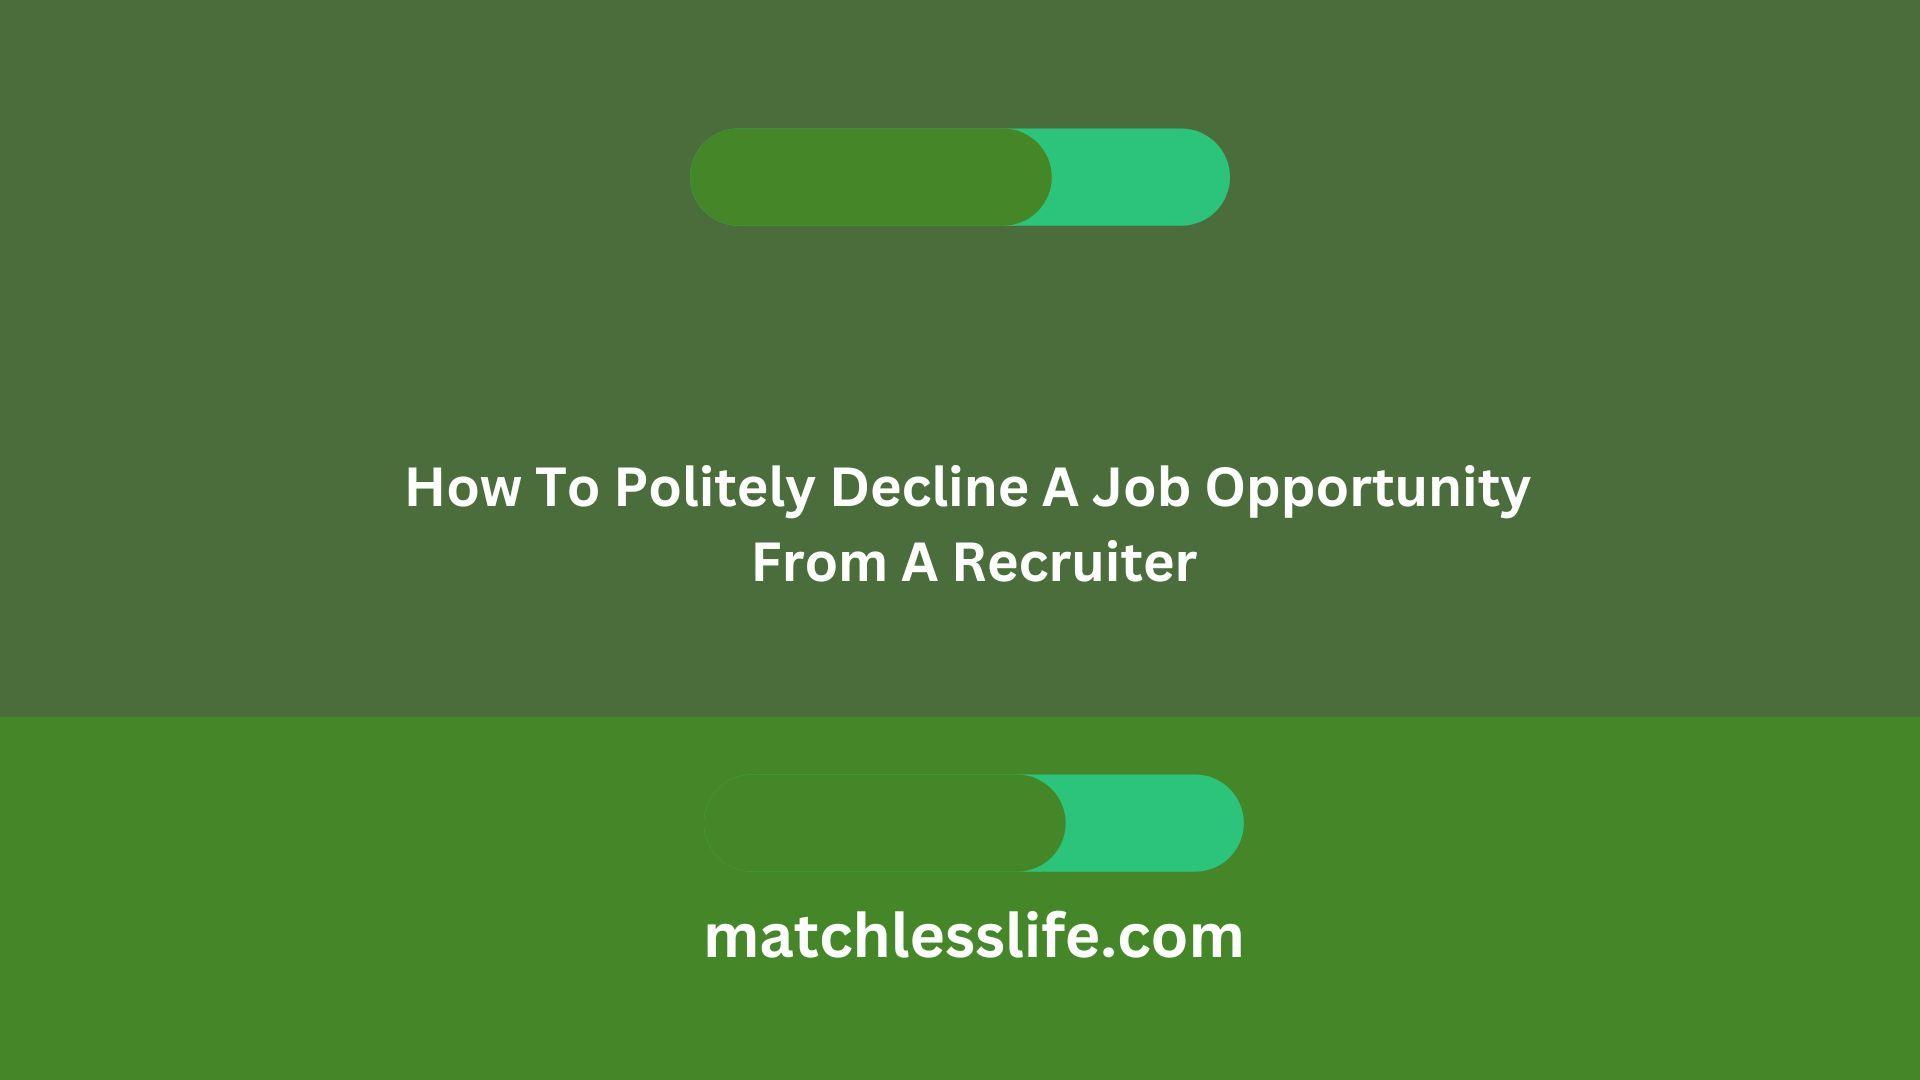 How To Politely Decline A Job Opportunity From A Recruiter